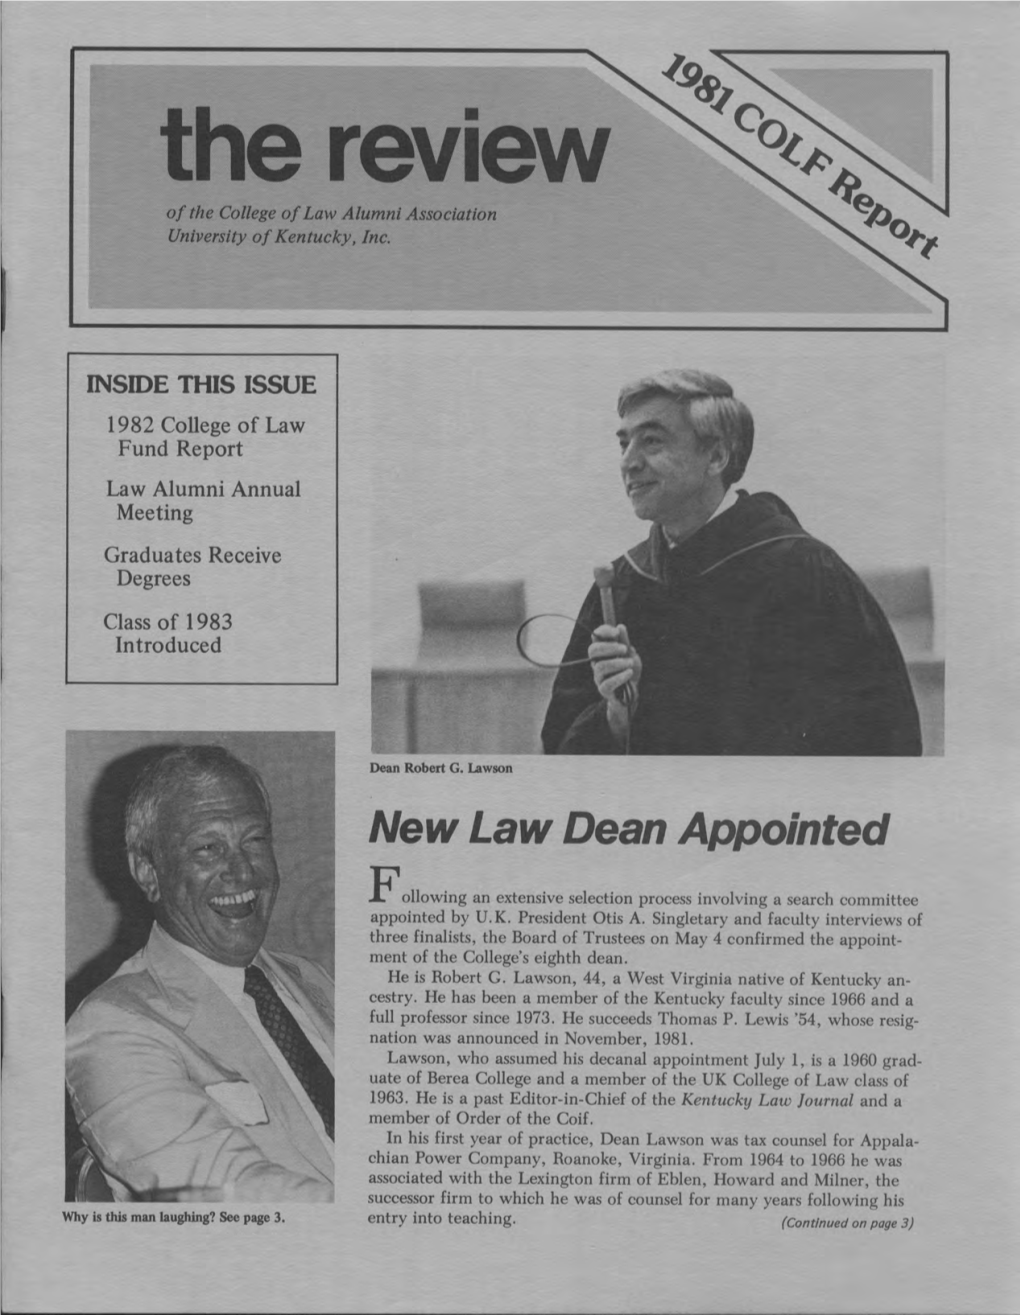 The Review of the College of Law Alumni Association, Fall 1982